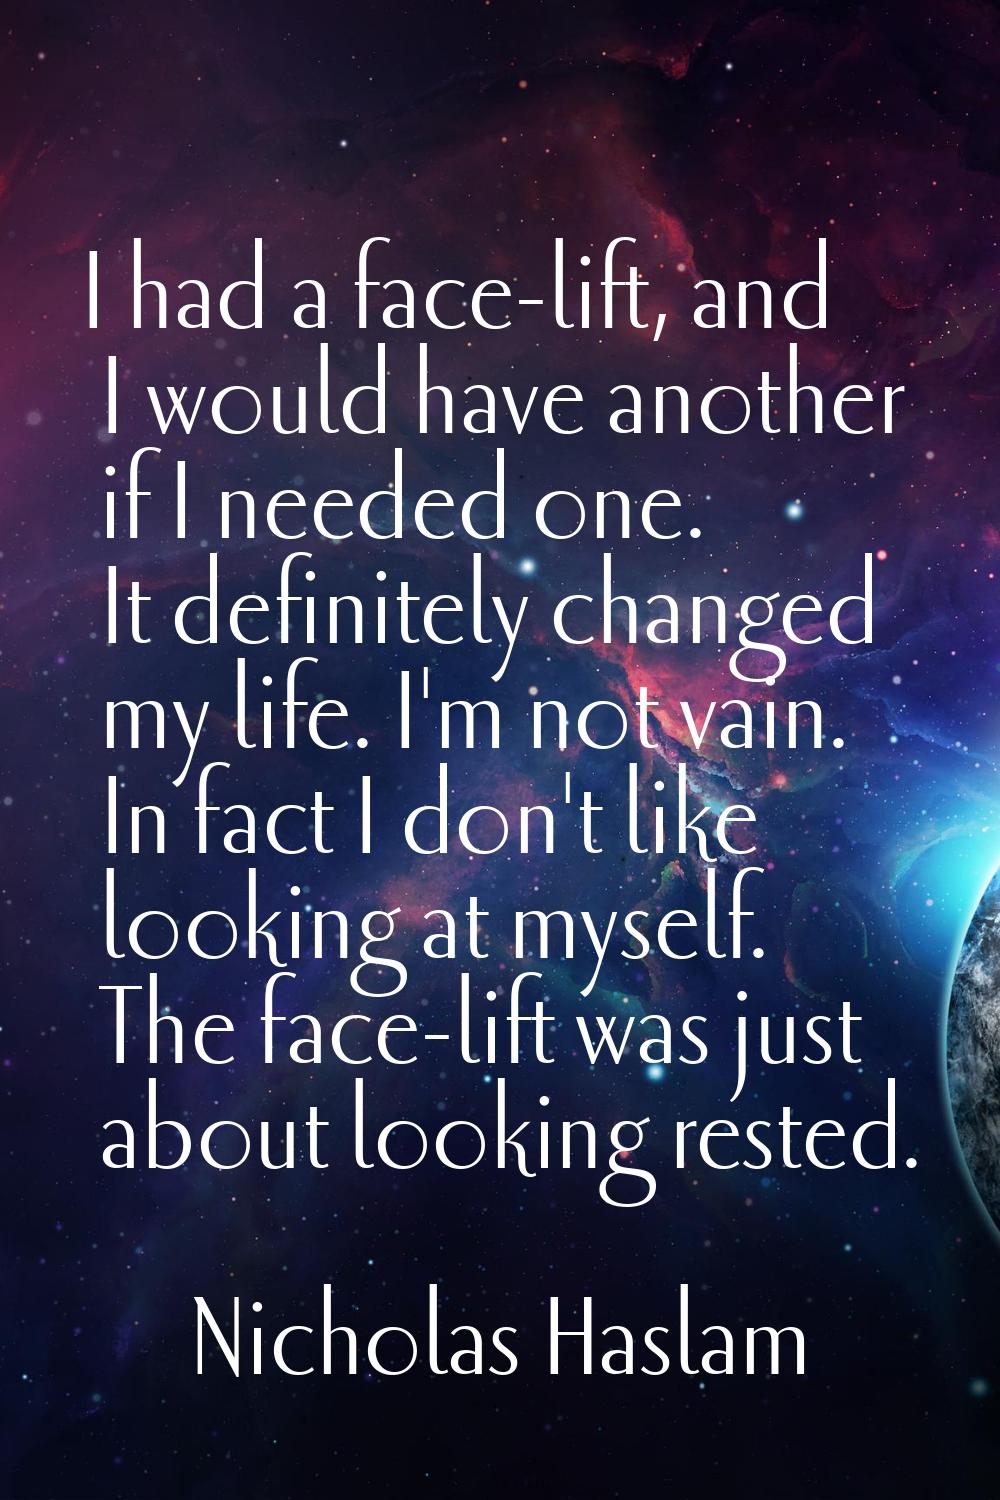 I had a face-lift, and I would have another if I needed one. It definitely changed my life. I'm not